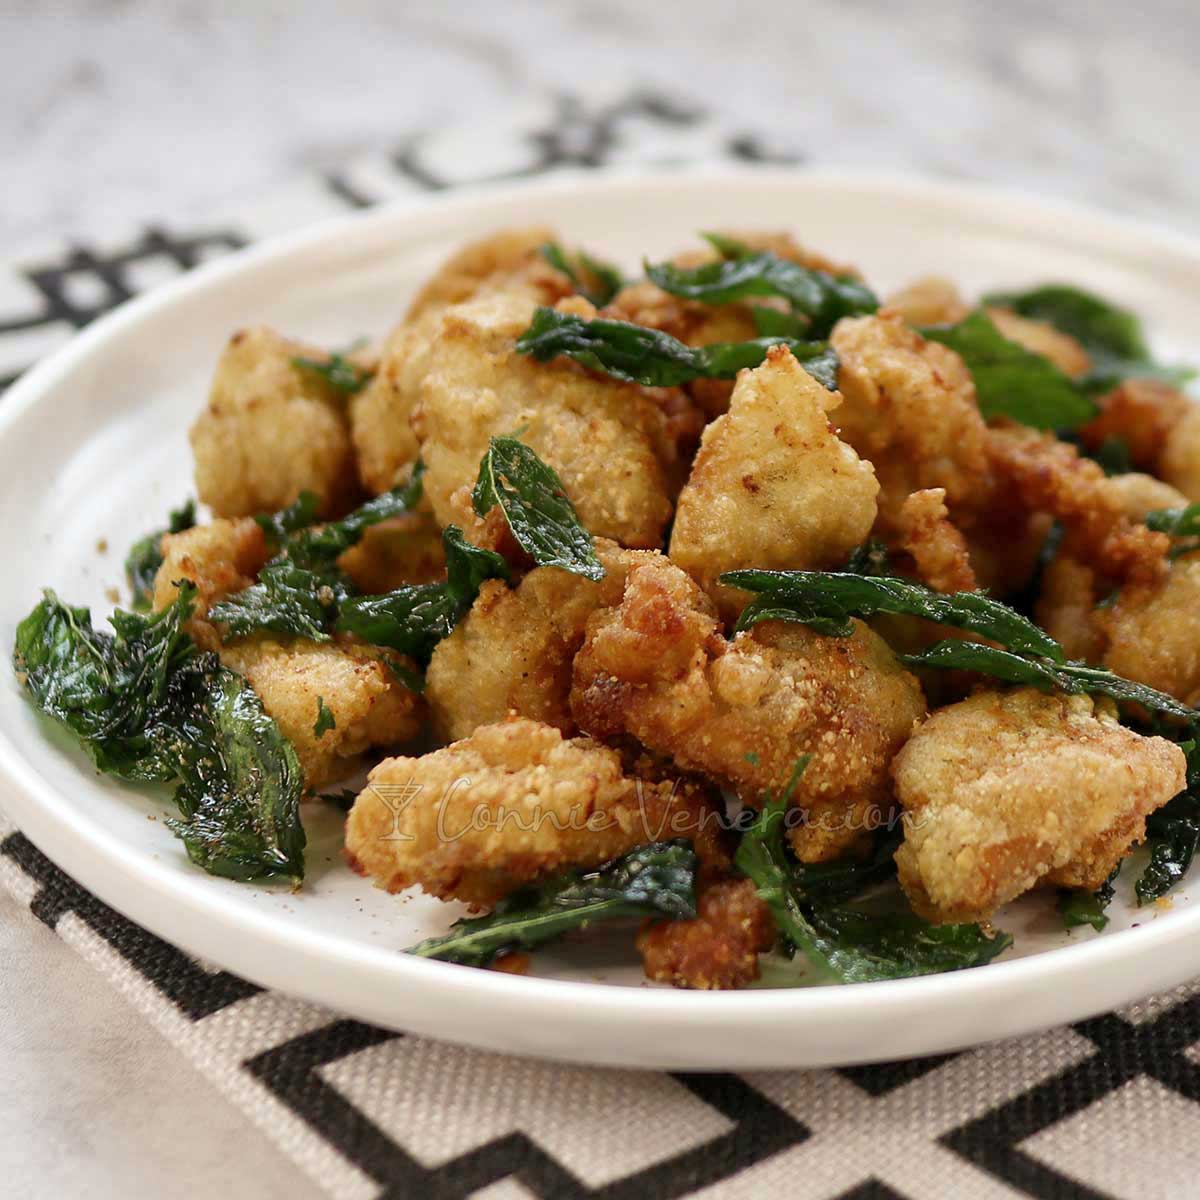 Taiwanese popcorn chicken with fried basil